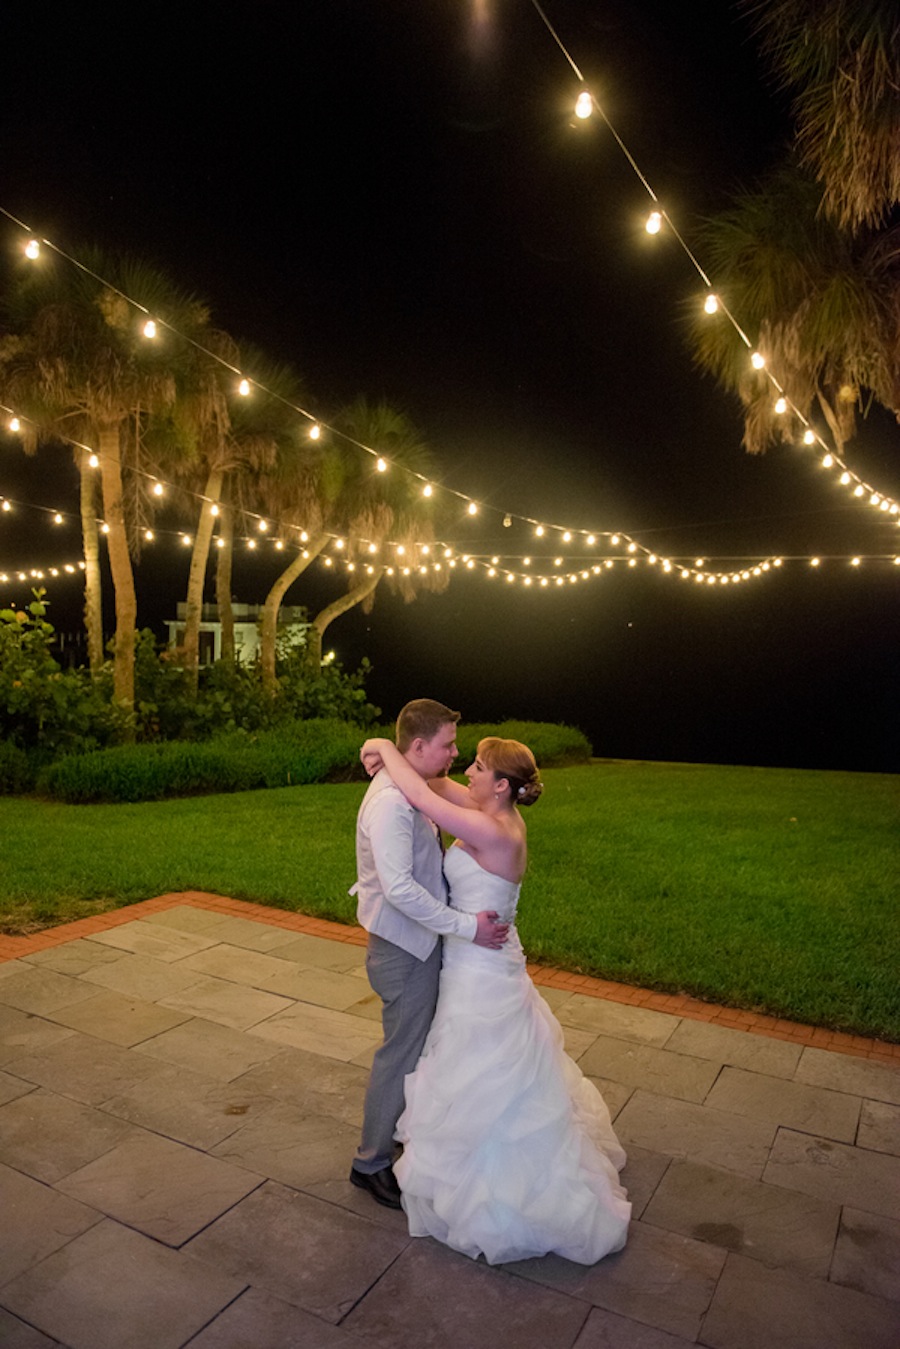 Outdoor Wedding Reception Sarasota Bride and Groom Dancing with String Lighting | The Bay Preserve at Osprey